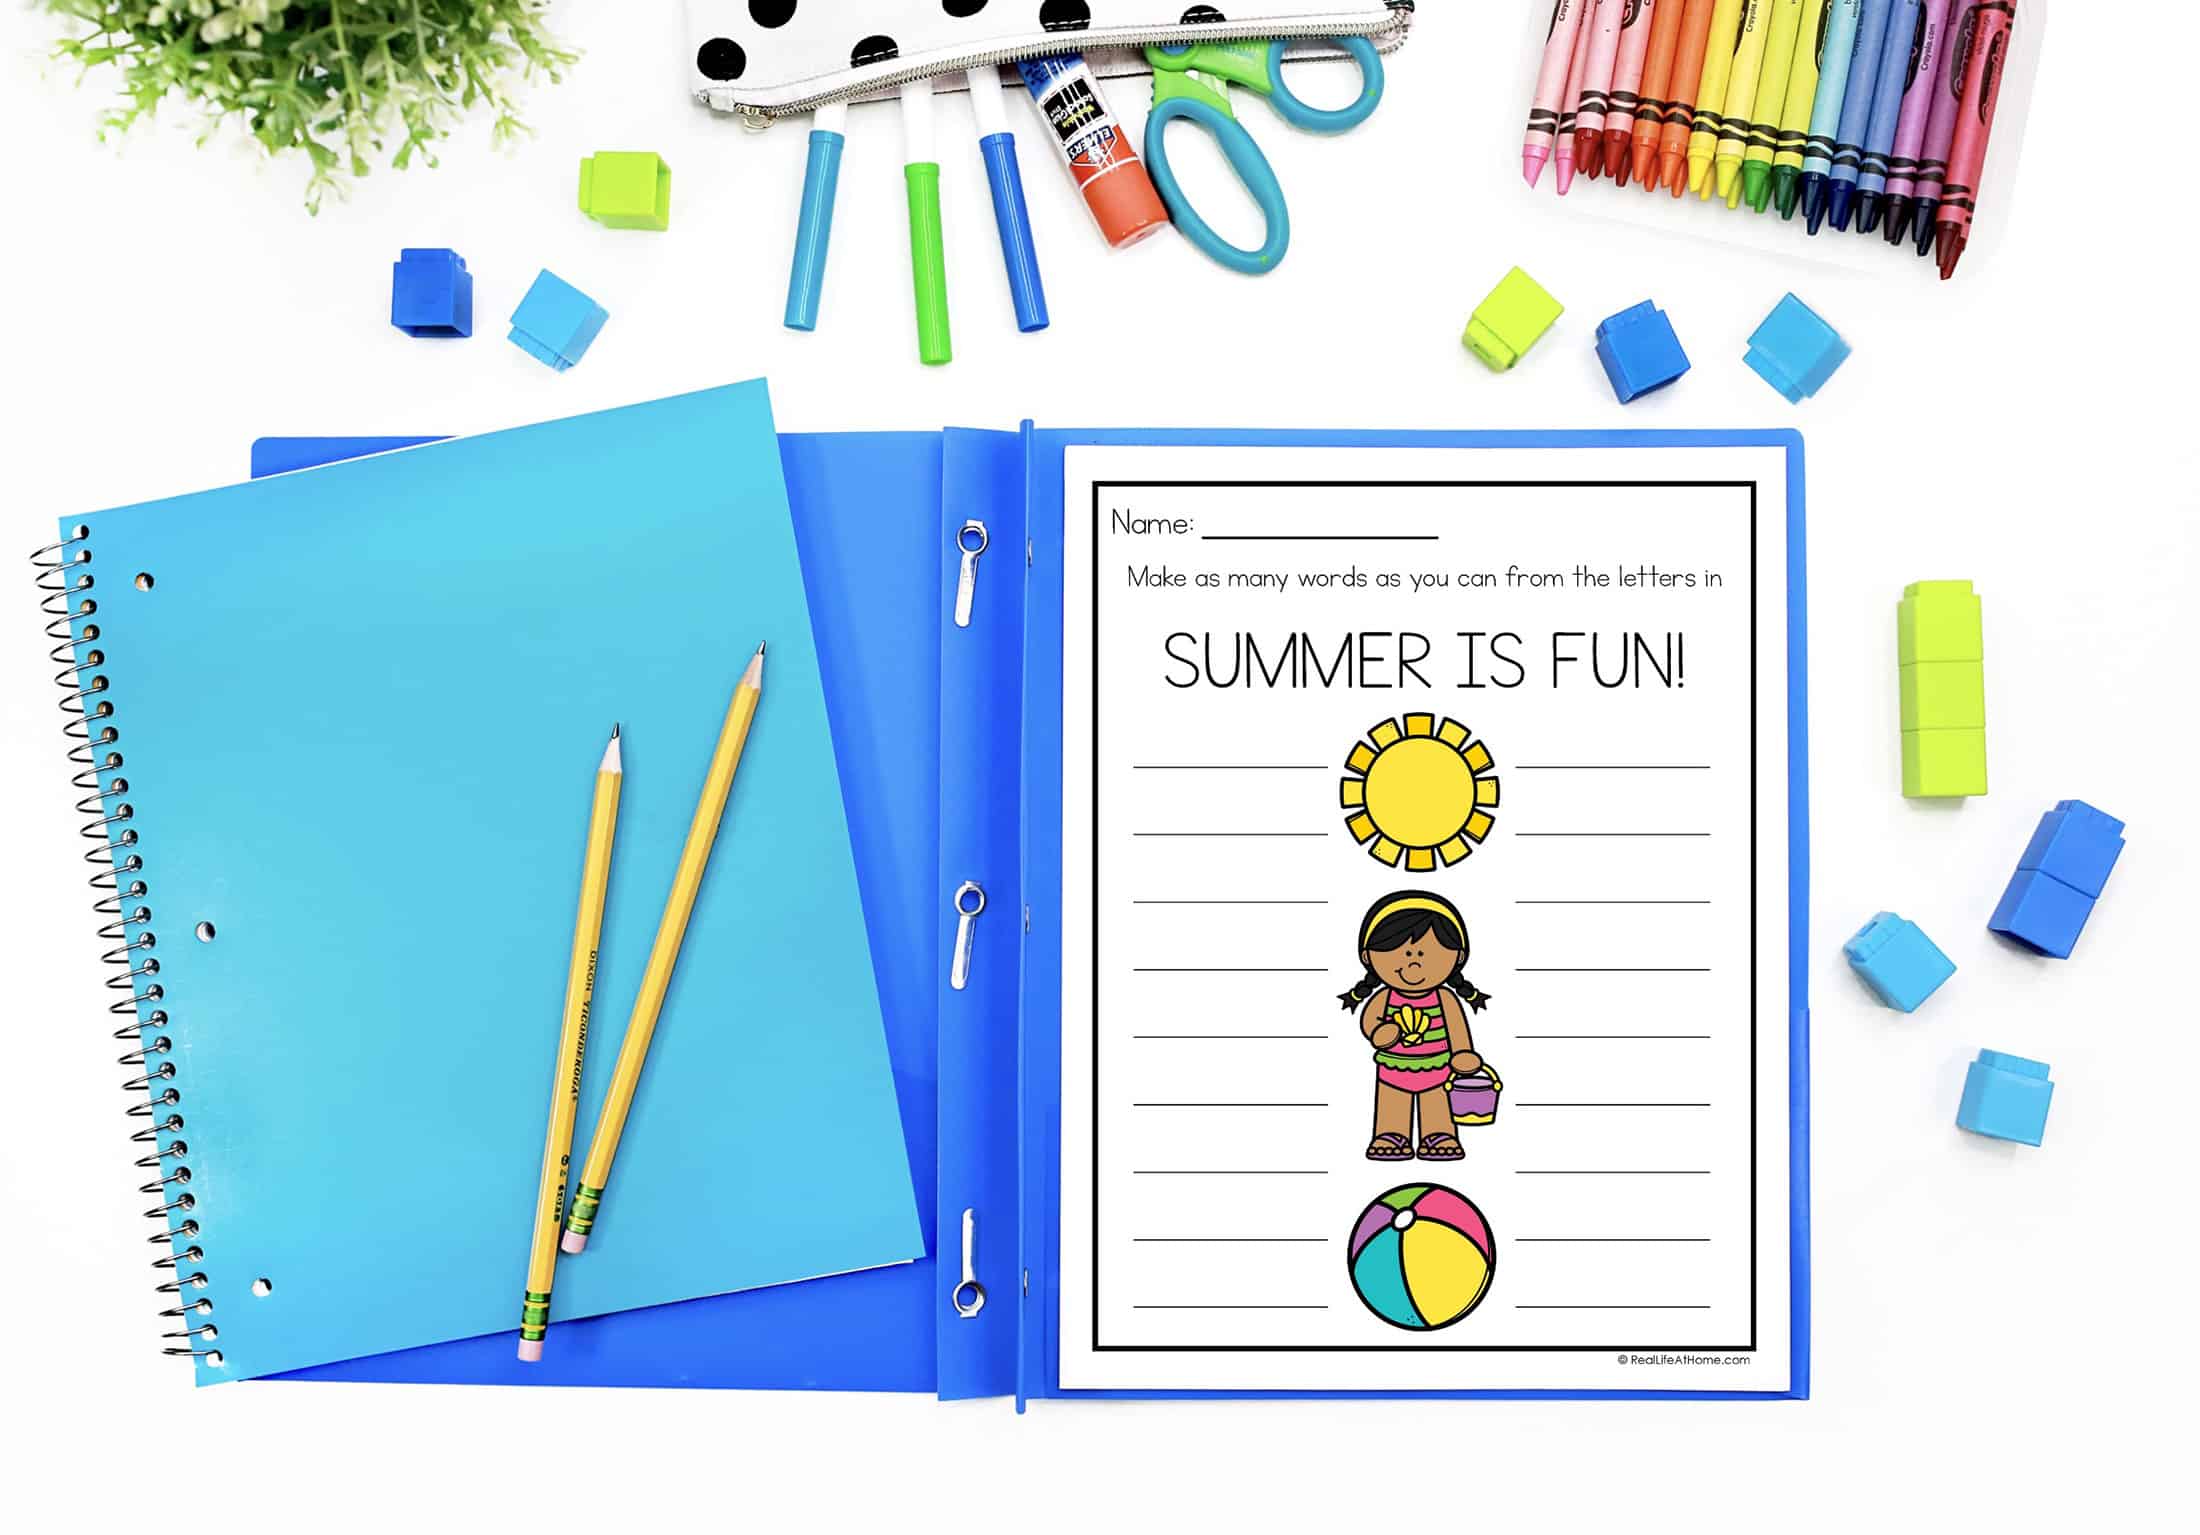 Summer is Fun Printable Activity on a Desktop surrounded by school supplies